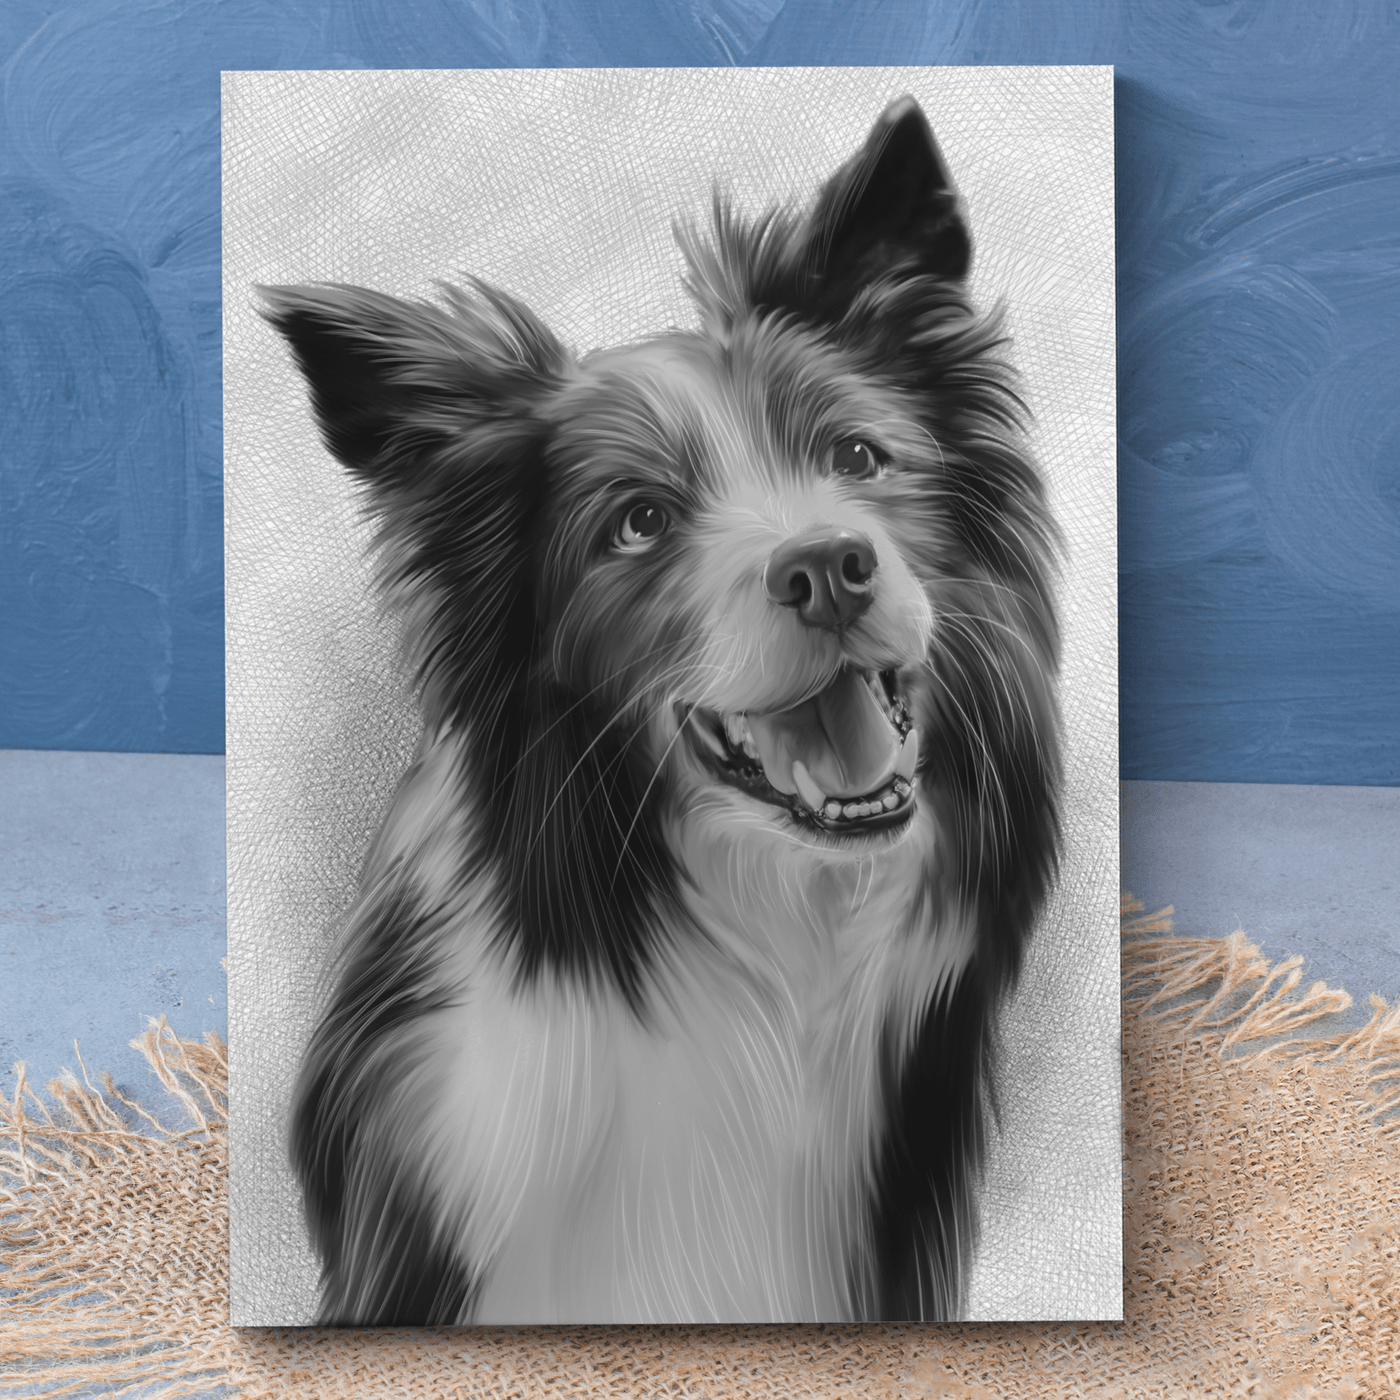 pet charcoal drawing of an adorable dog